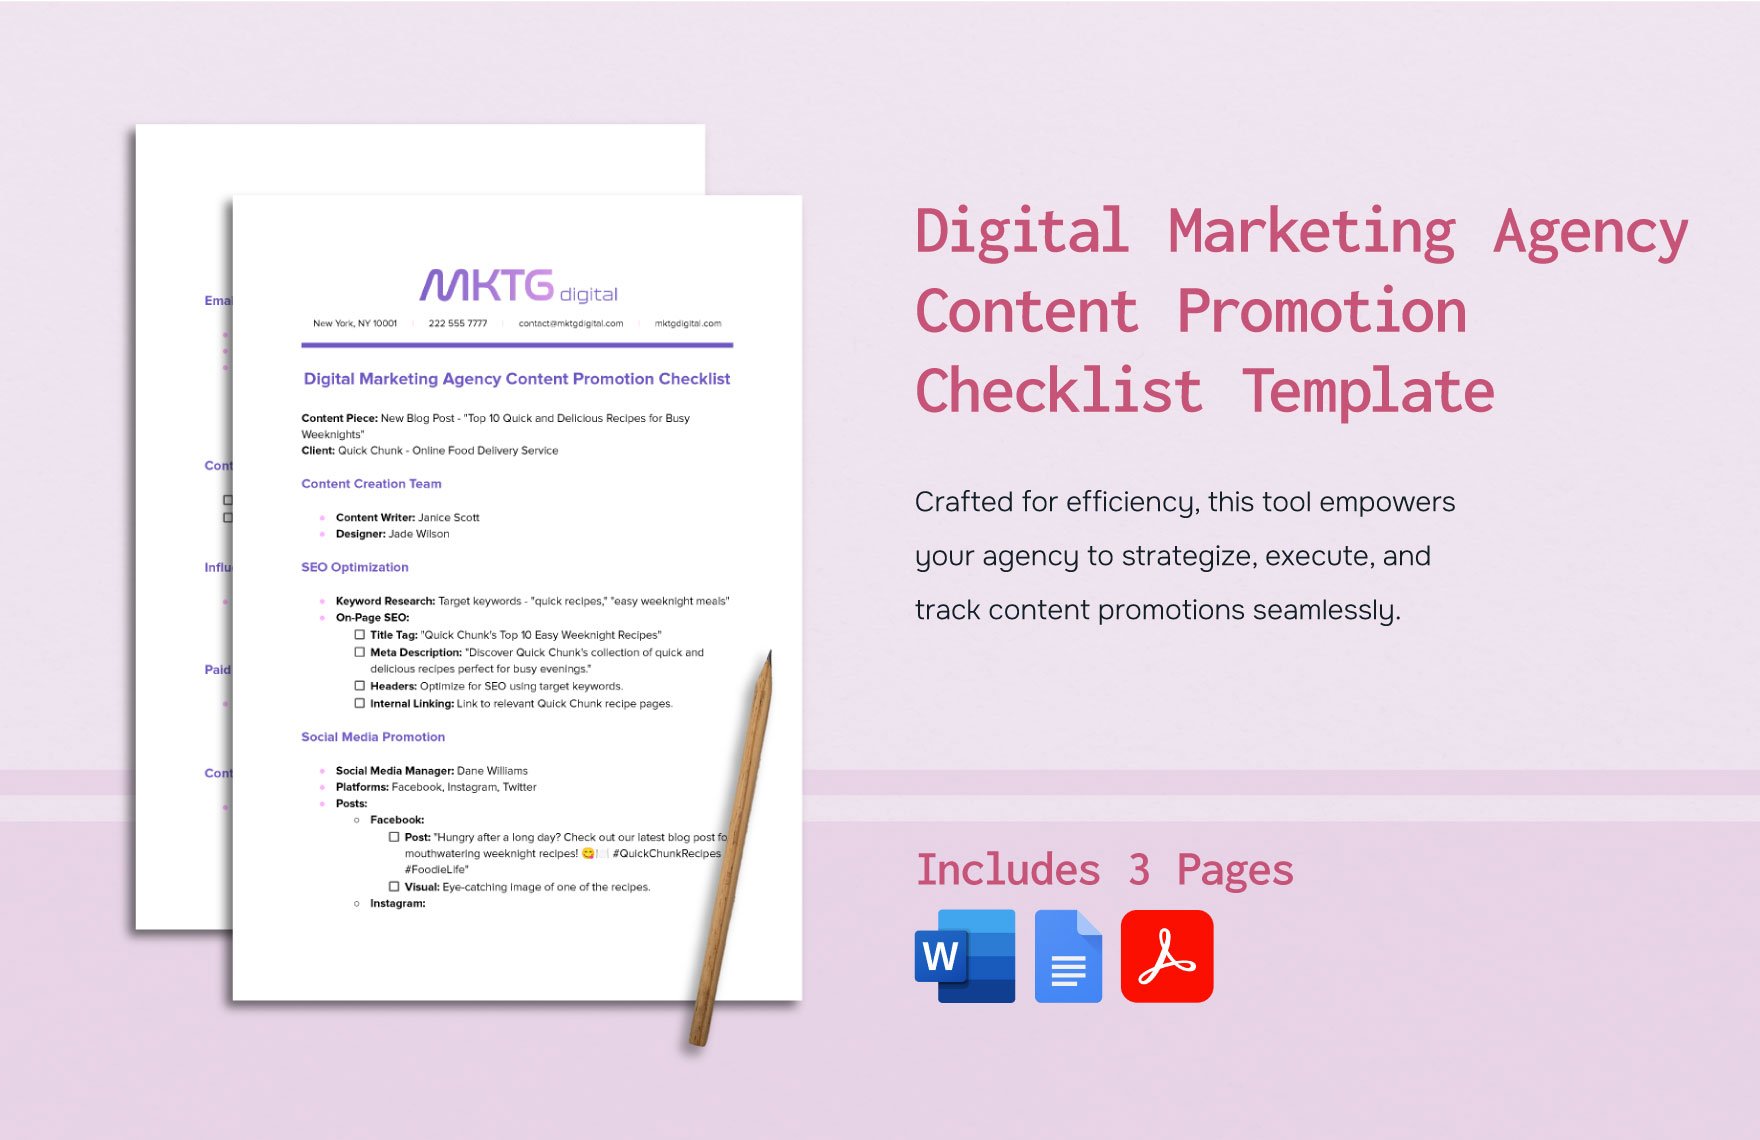 Digital Marketing Agency Content Promotion Checklist Template in Word, Google Docs, PDF